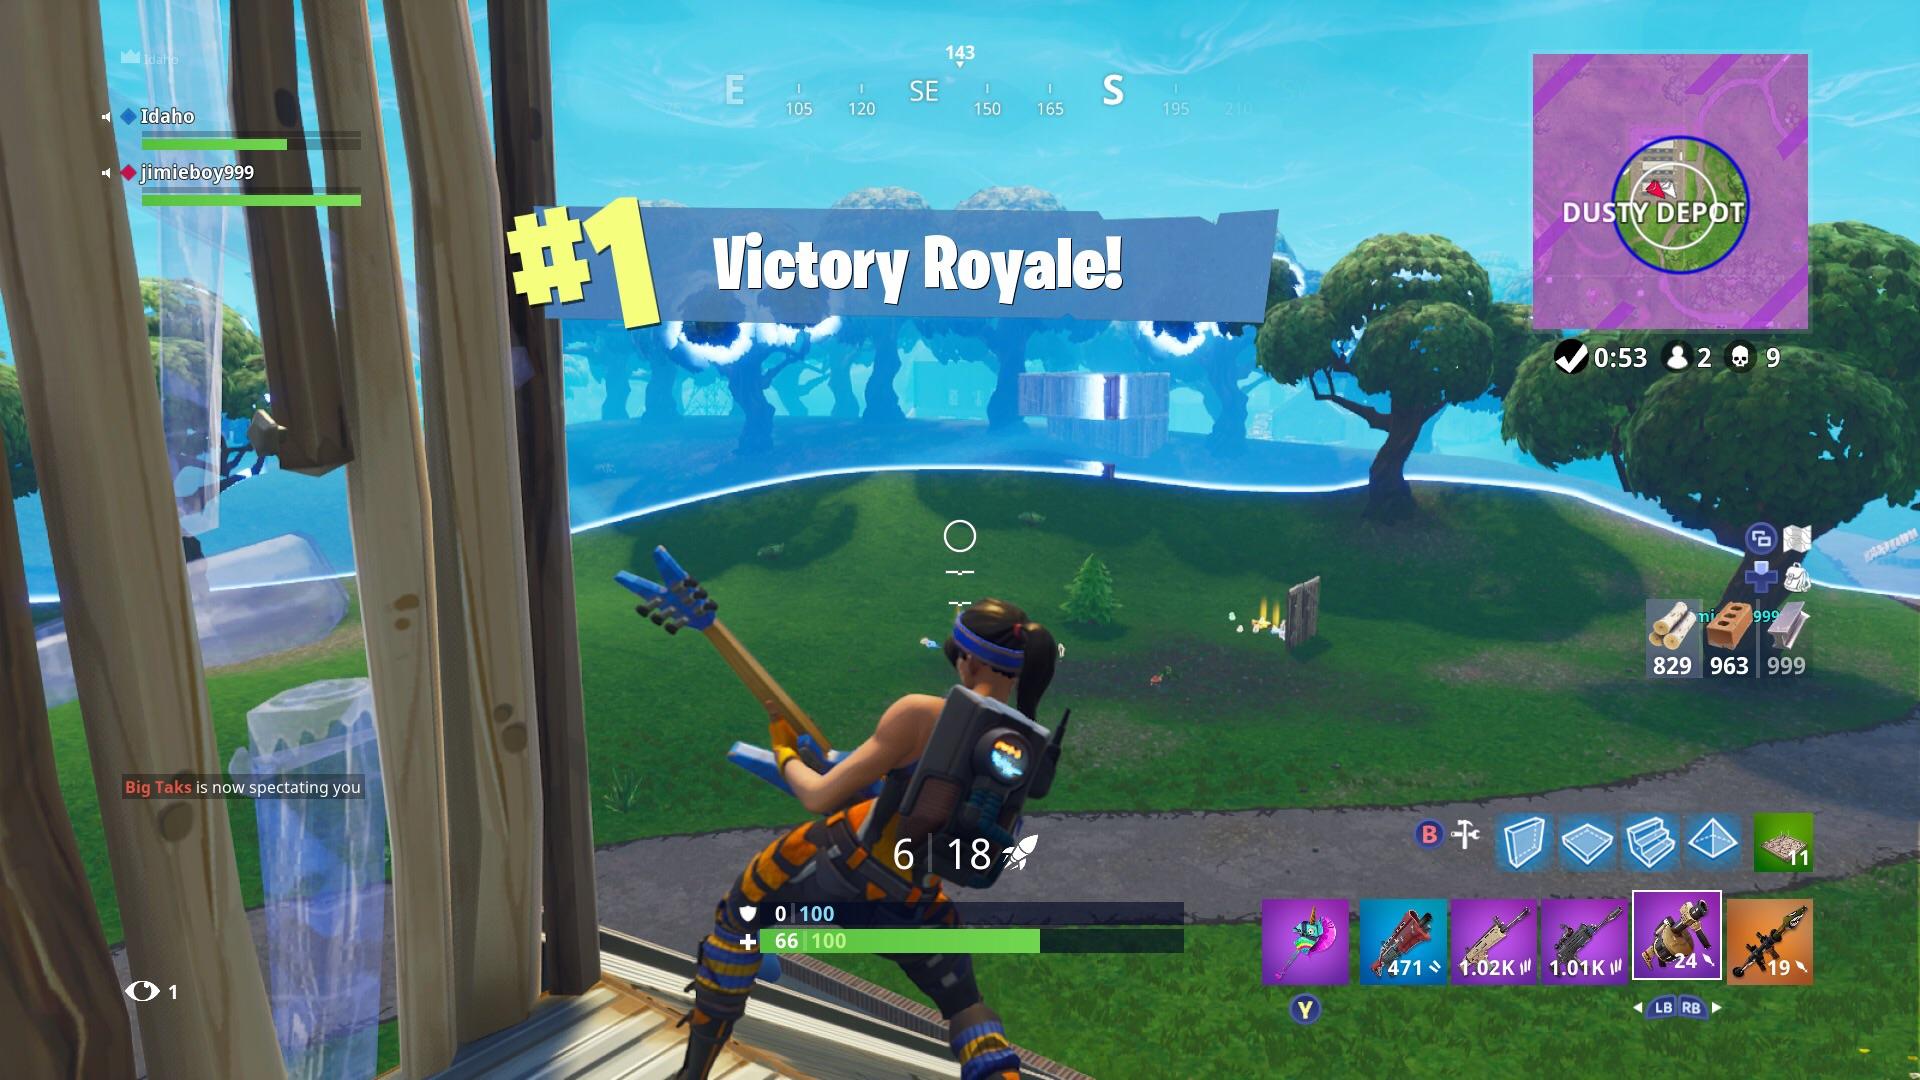 I Won A Game At Dusty While Wearing The Dominator Of Depot